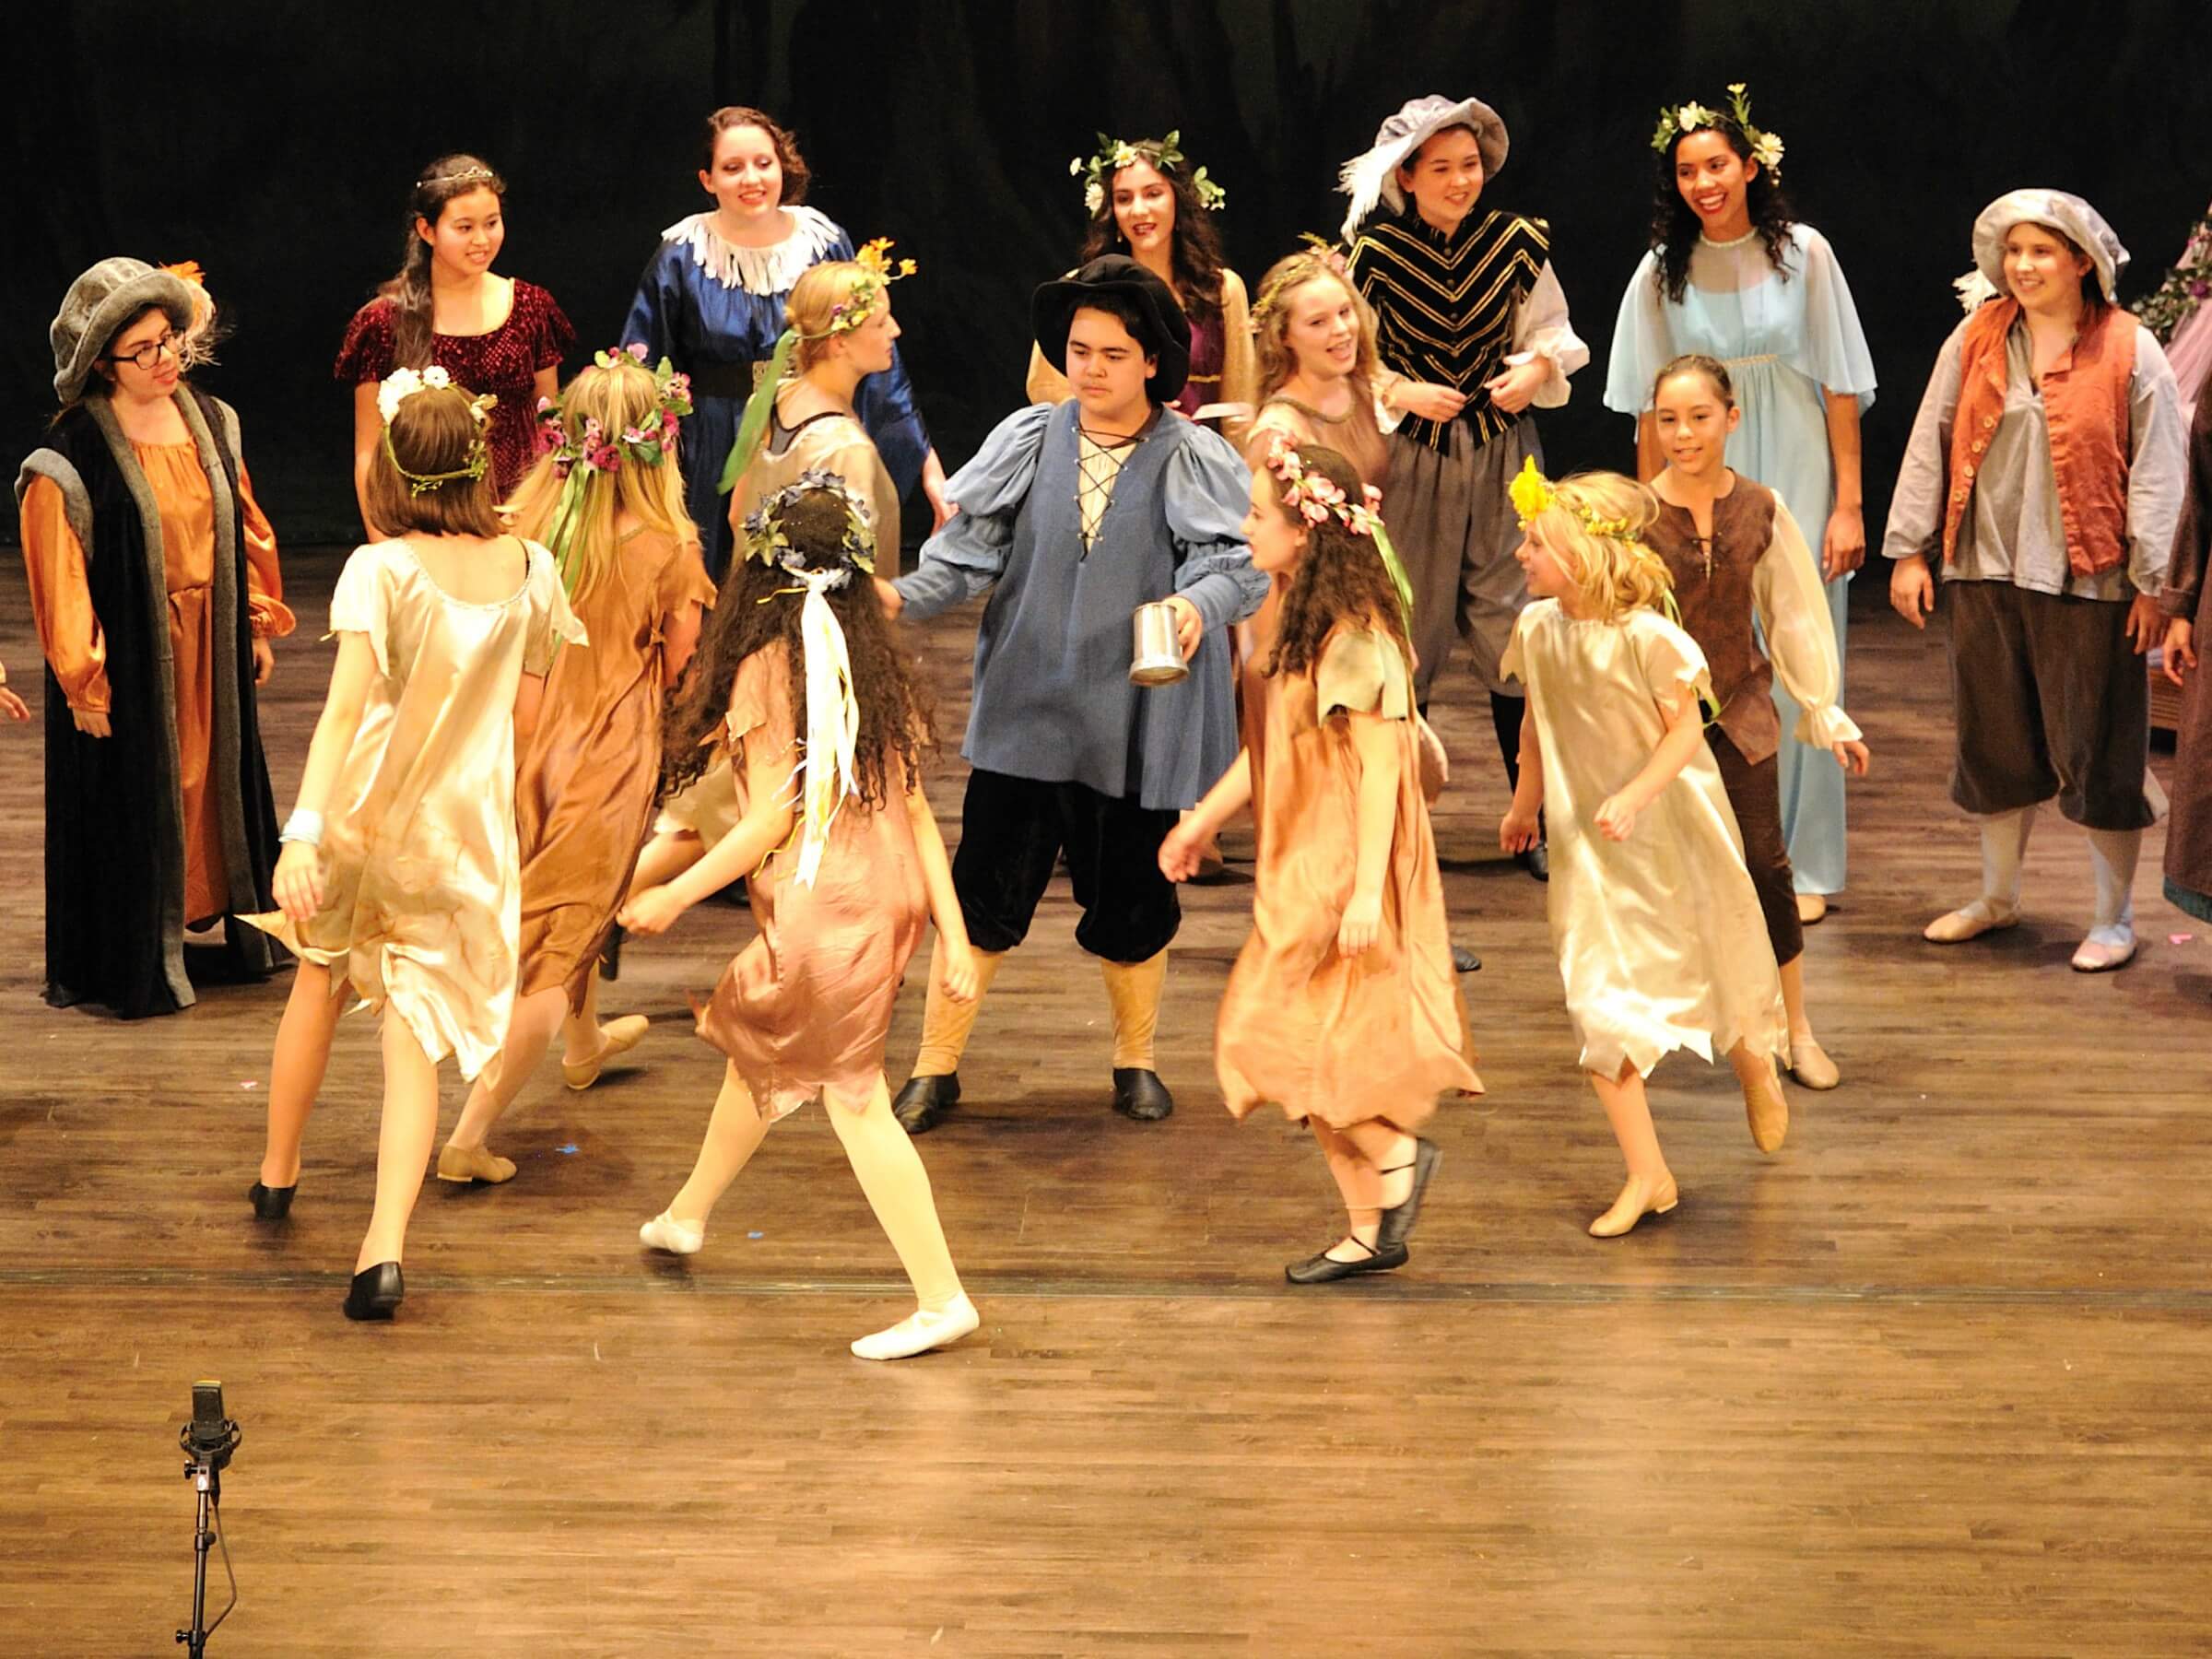 Students performing in costumes dancing in a circle